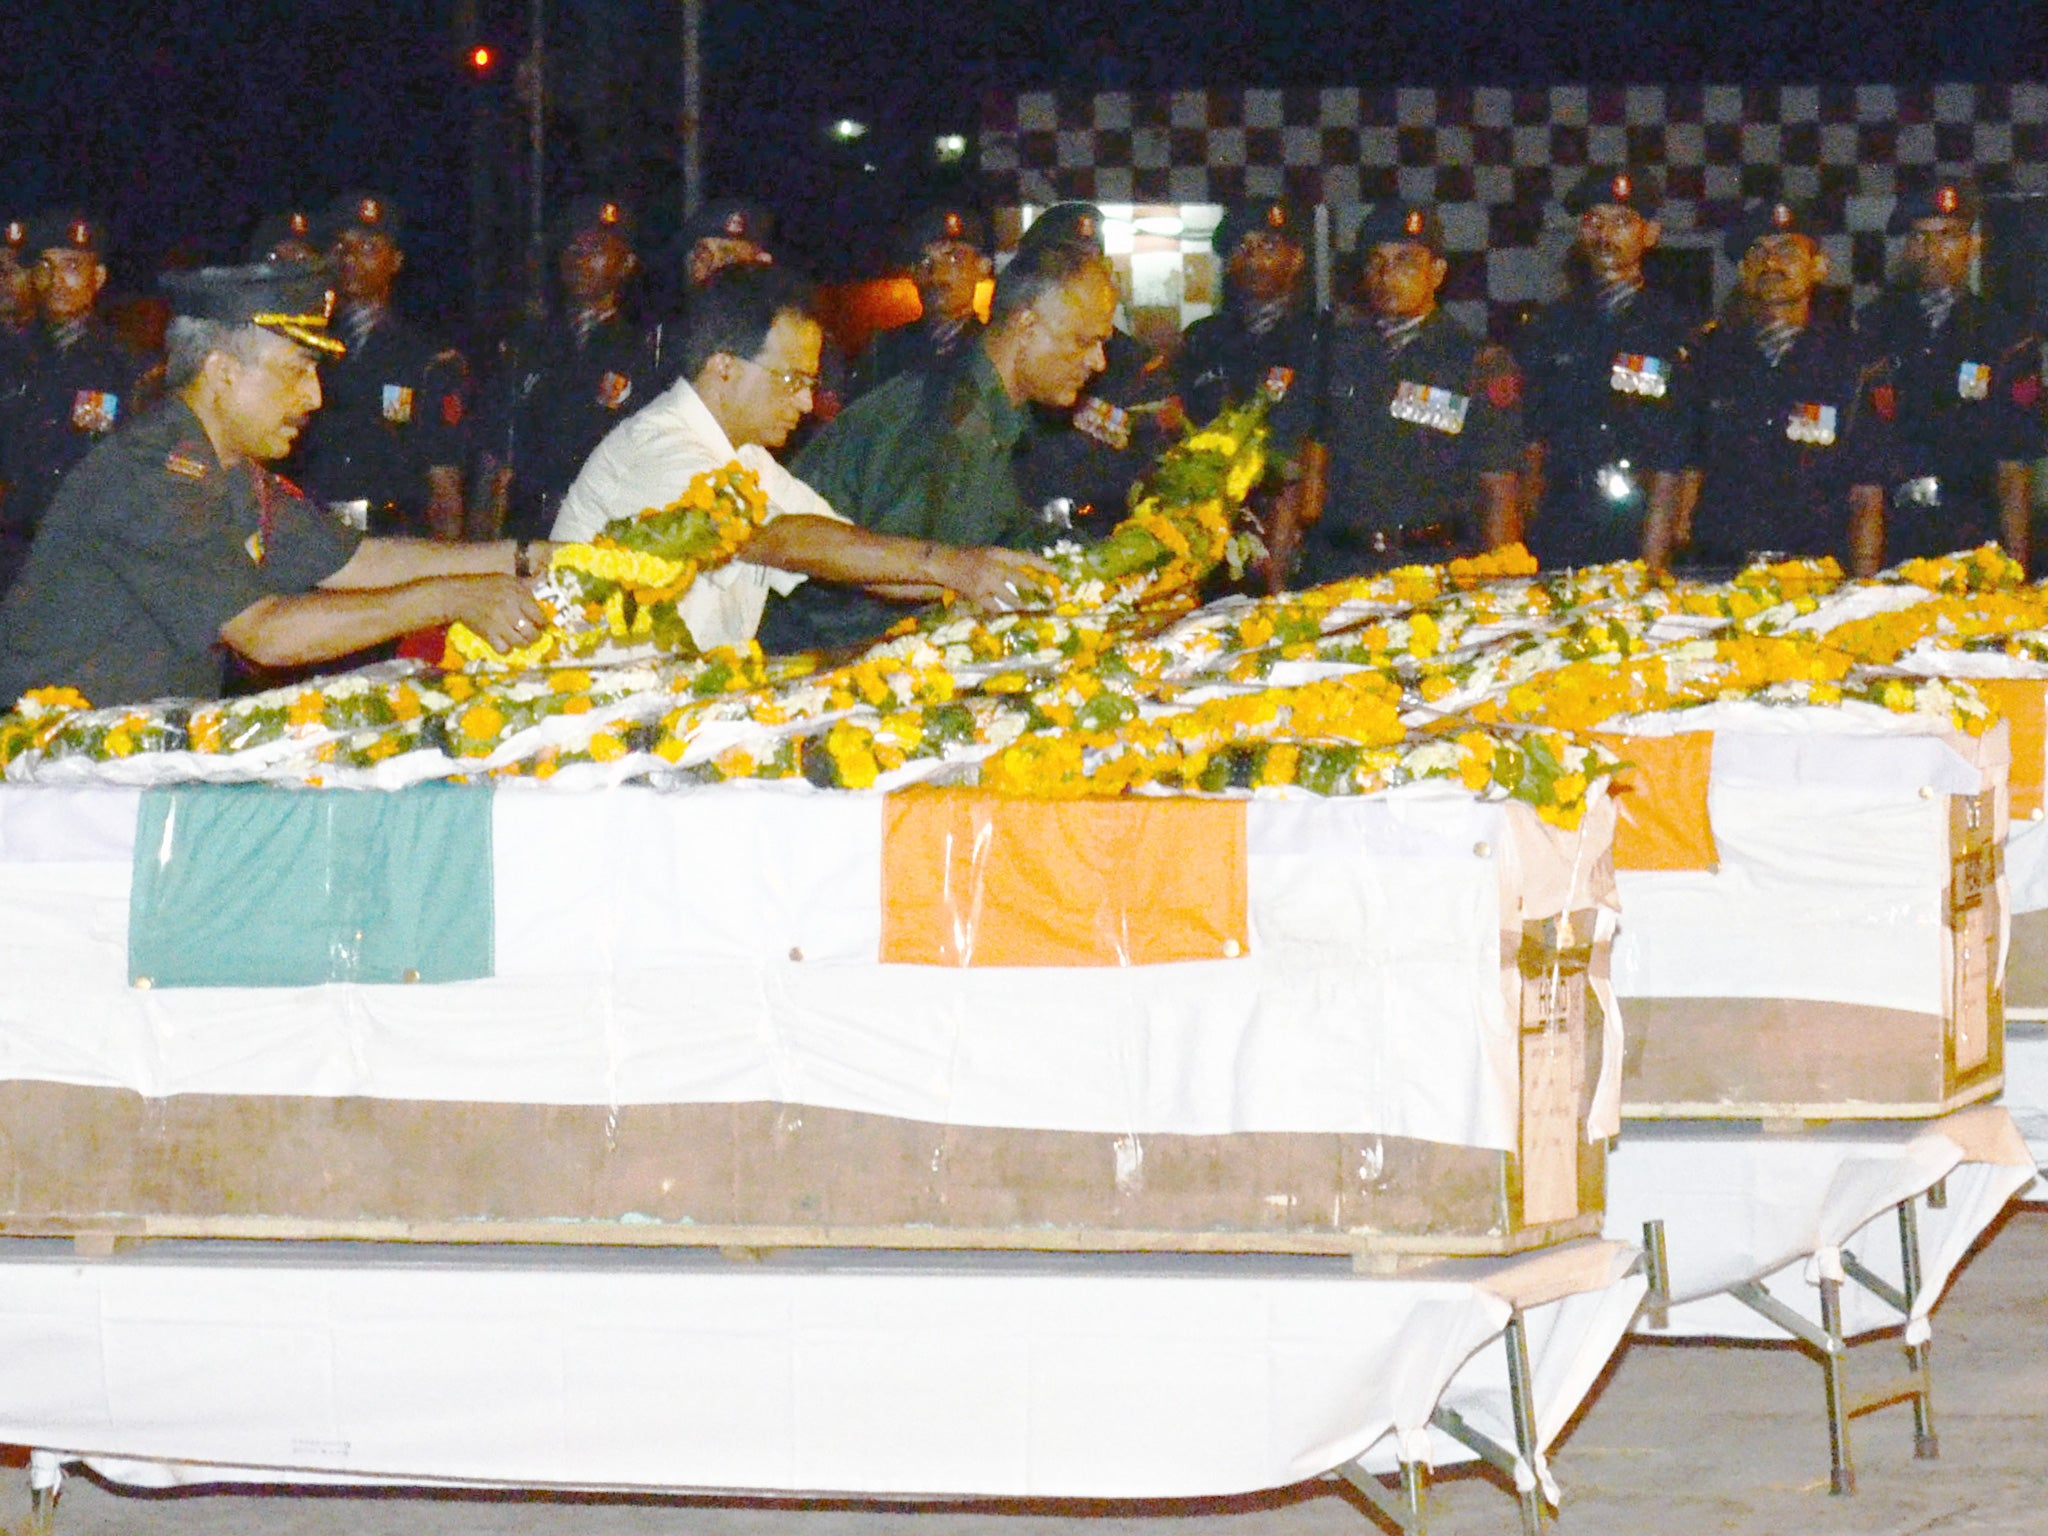 Indian Army officers lay wreaths and pay their respects over the caskets of five soldiers killed in during a cross-border attack in Kashmir, following the arrival of their remains at the Patna Airport